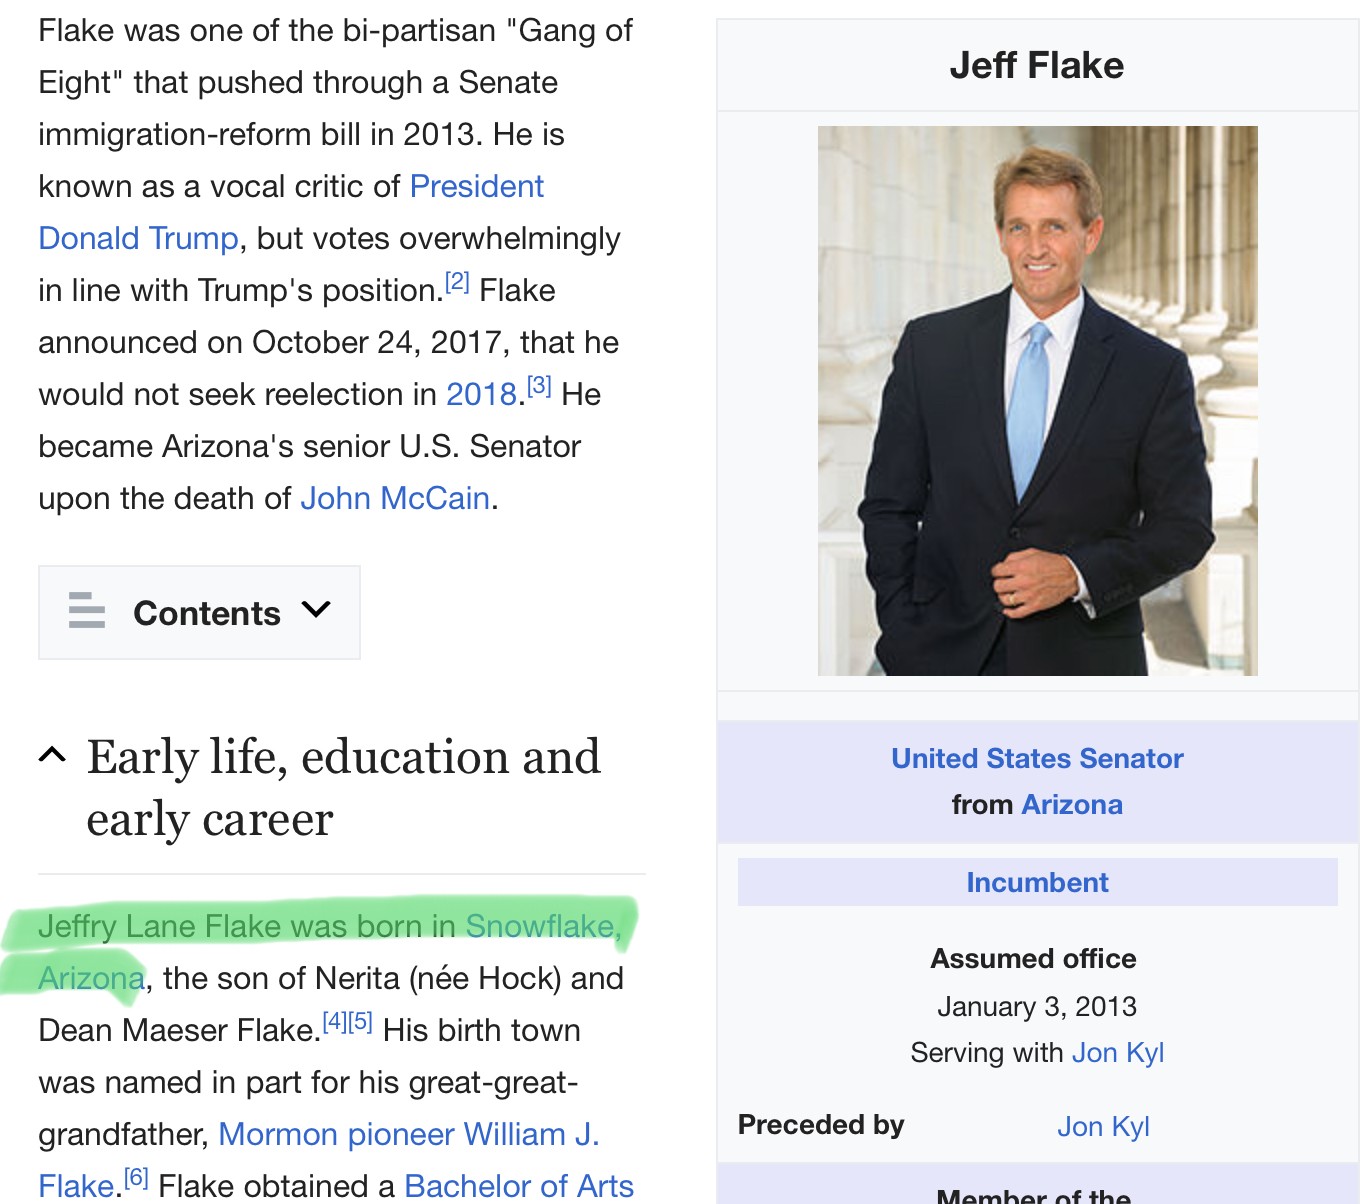 presentation - Jeff Flake Flake was one of the bipartisan "Gang of Eight" that pushed through a Senate immigrationreform bill in 2013. He is known as a vocal critic of President Donald Trump, but votes overwhelmingly in line with Trump's position.2 Flake 